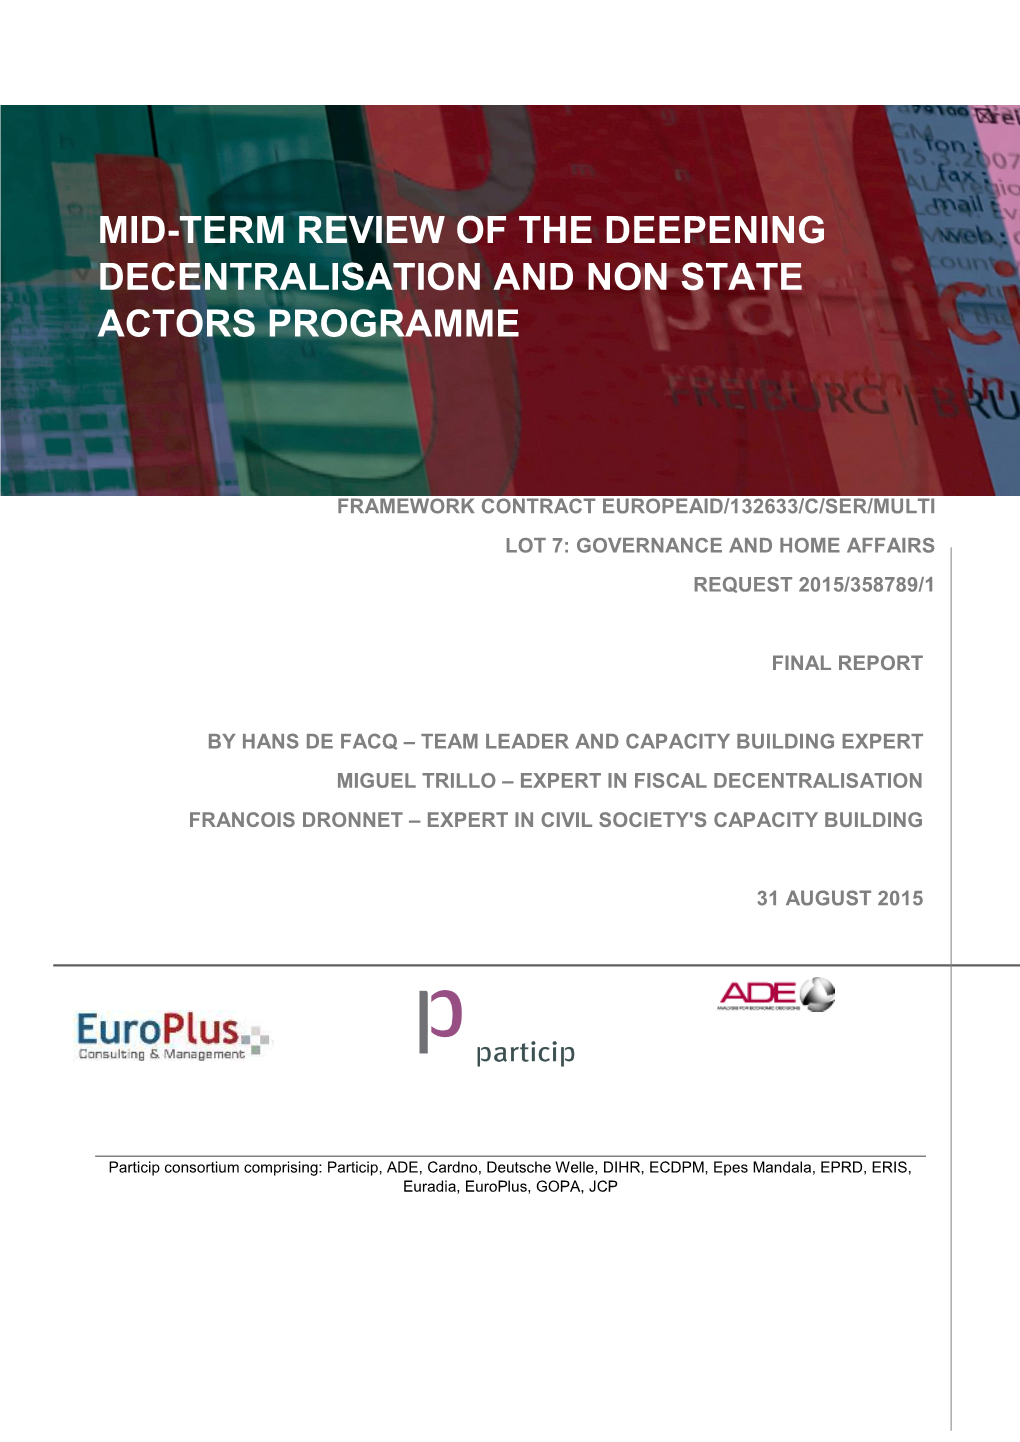 Mid-Term Review of the Deepening Decentralisation and Non State Actors Programme